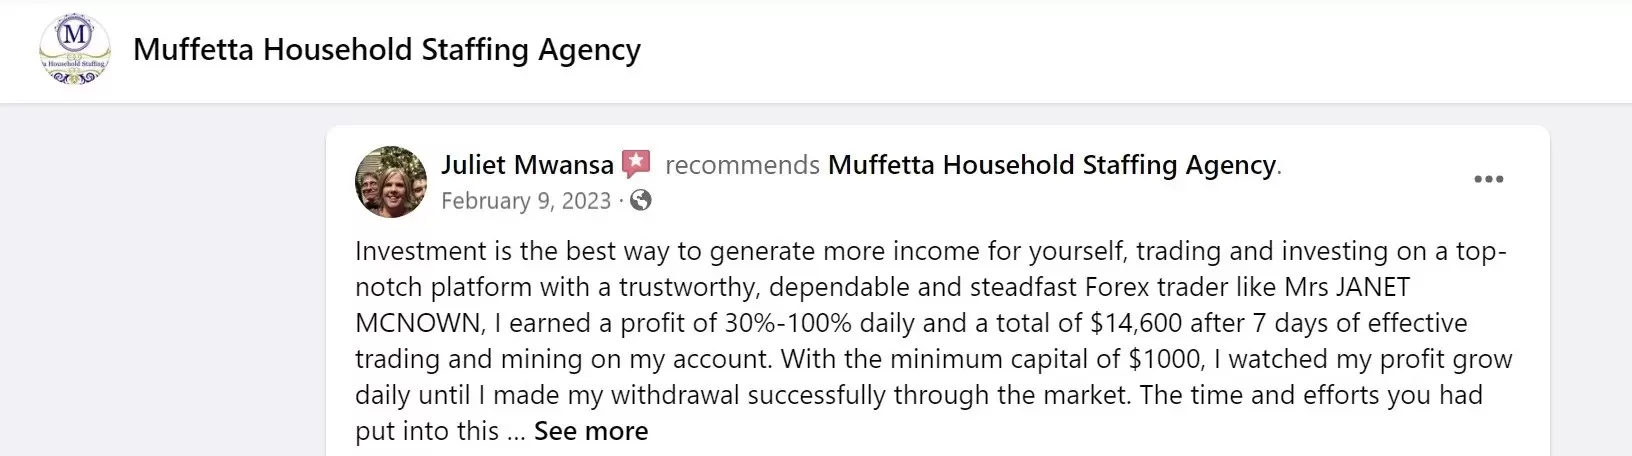 positive review of Muffetta Household Staffing Agency